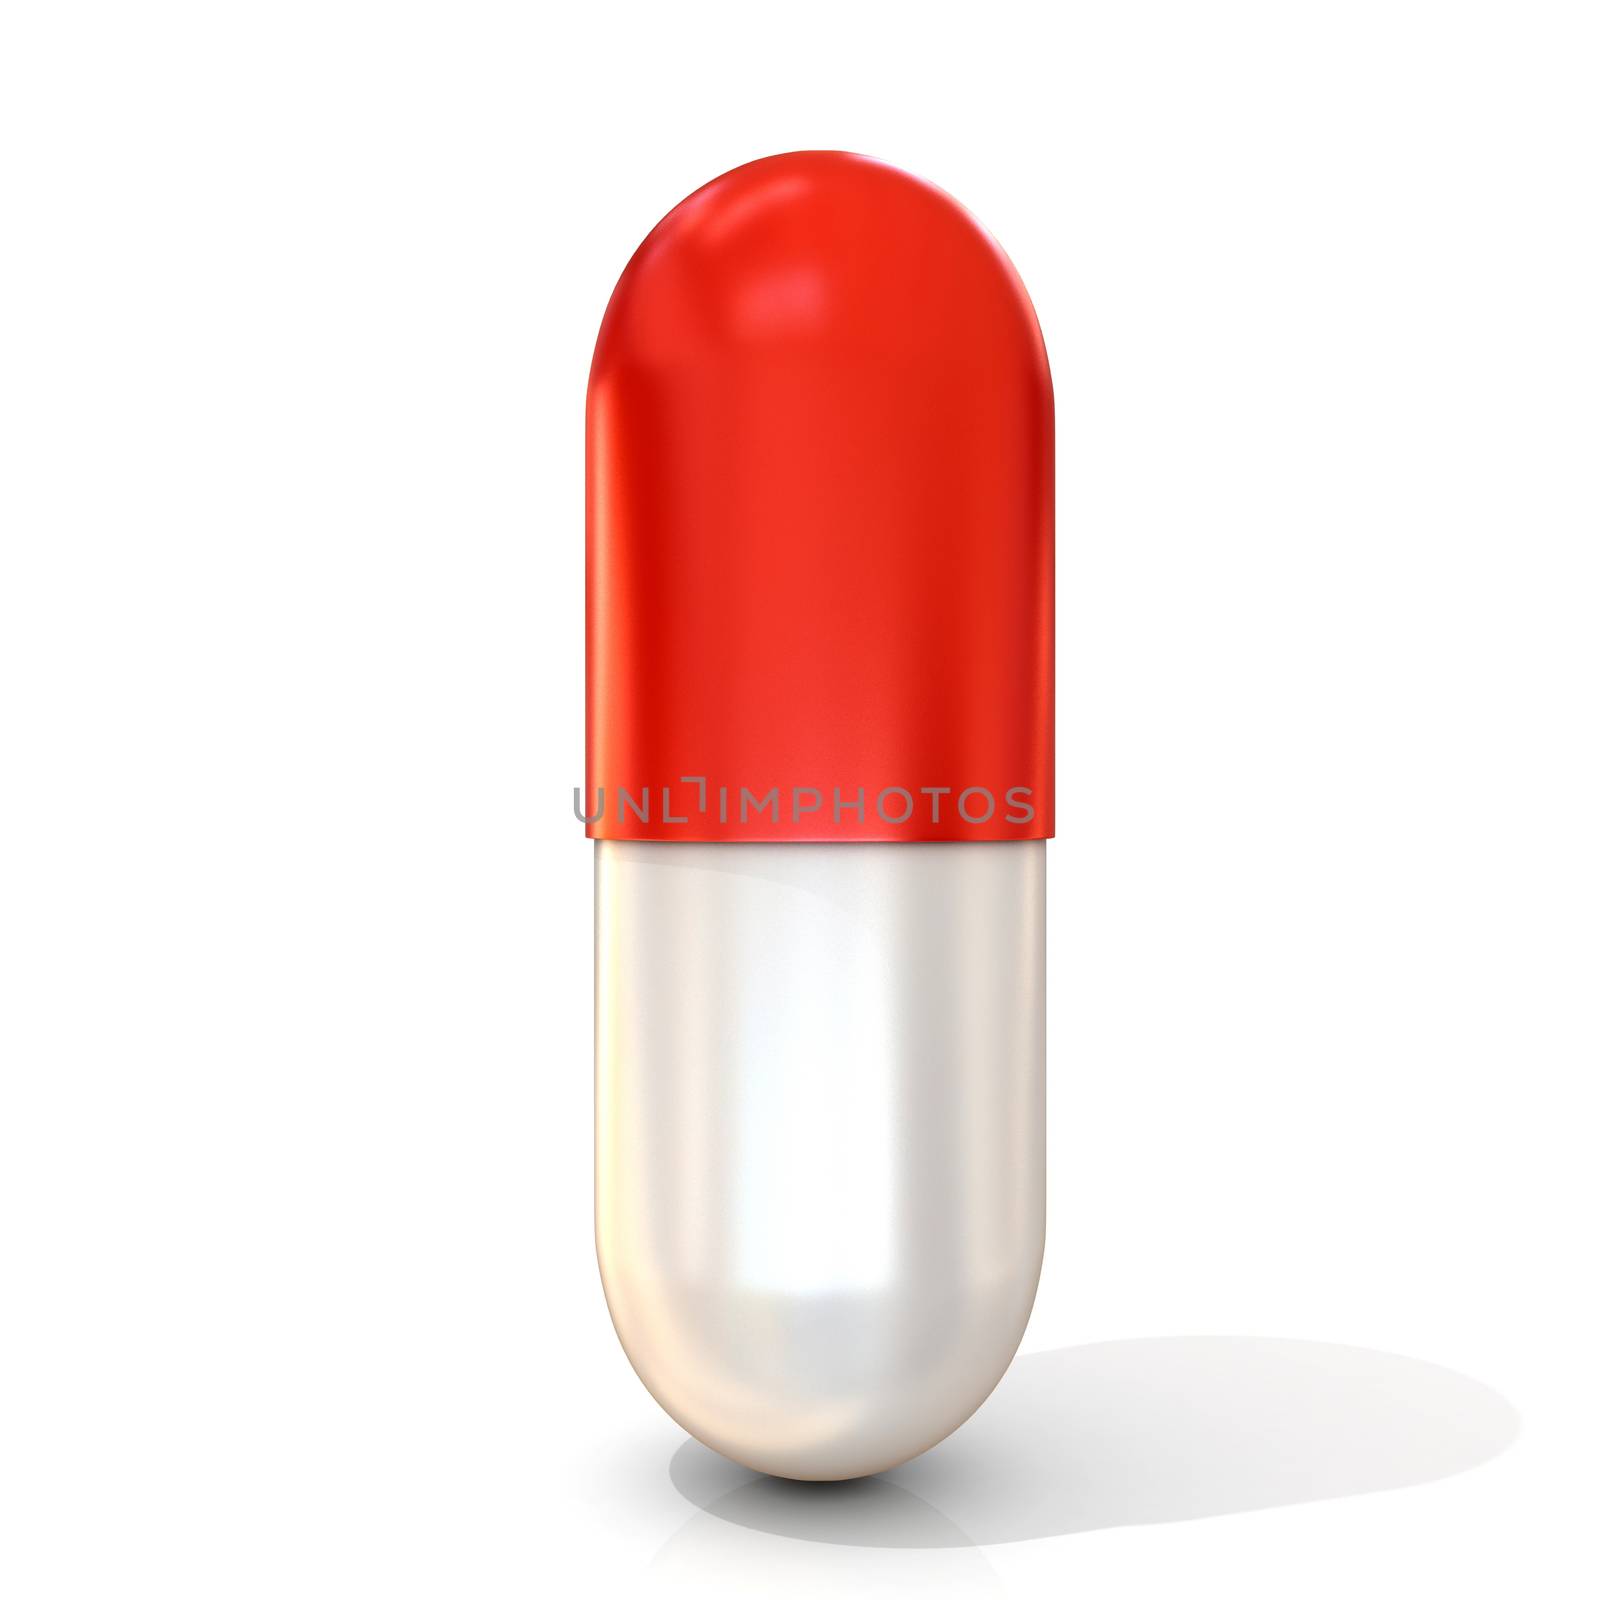 Red pill capsule by djmilic